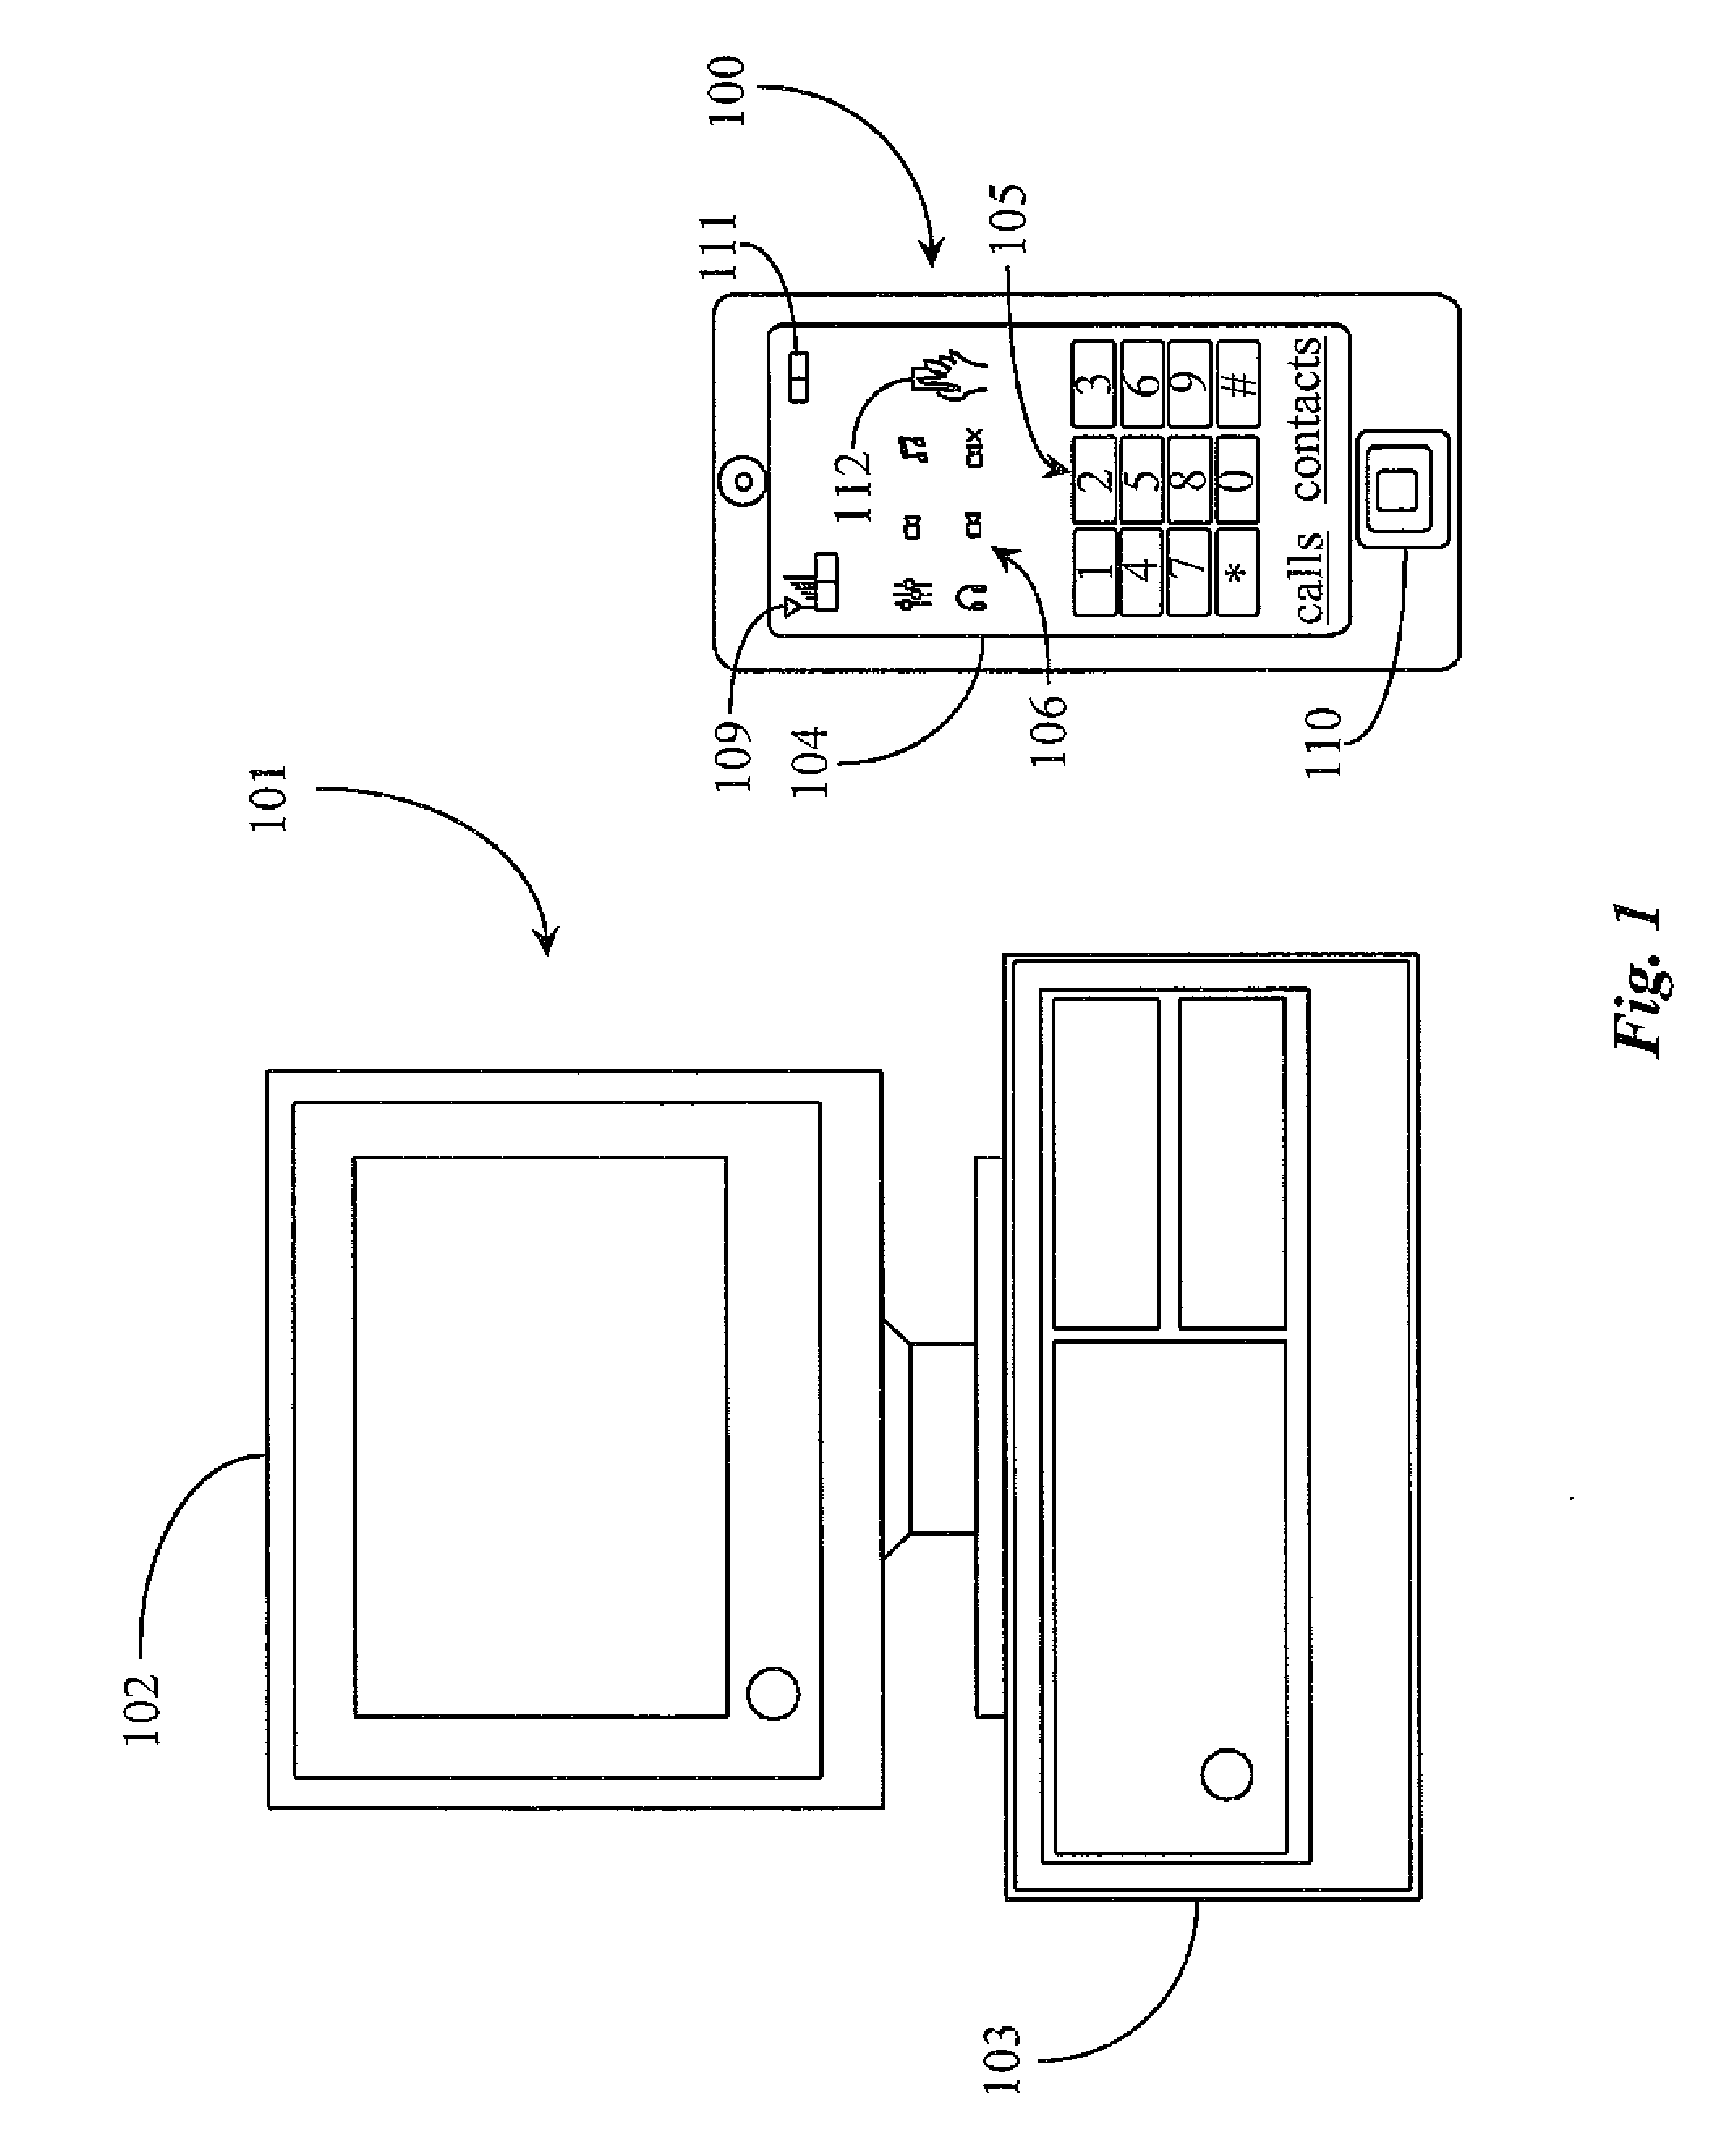 Computer Peripheral Device Used for Communication and as a Pointing Device